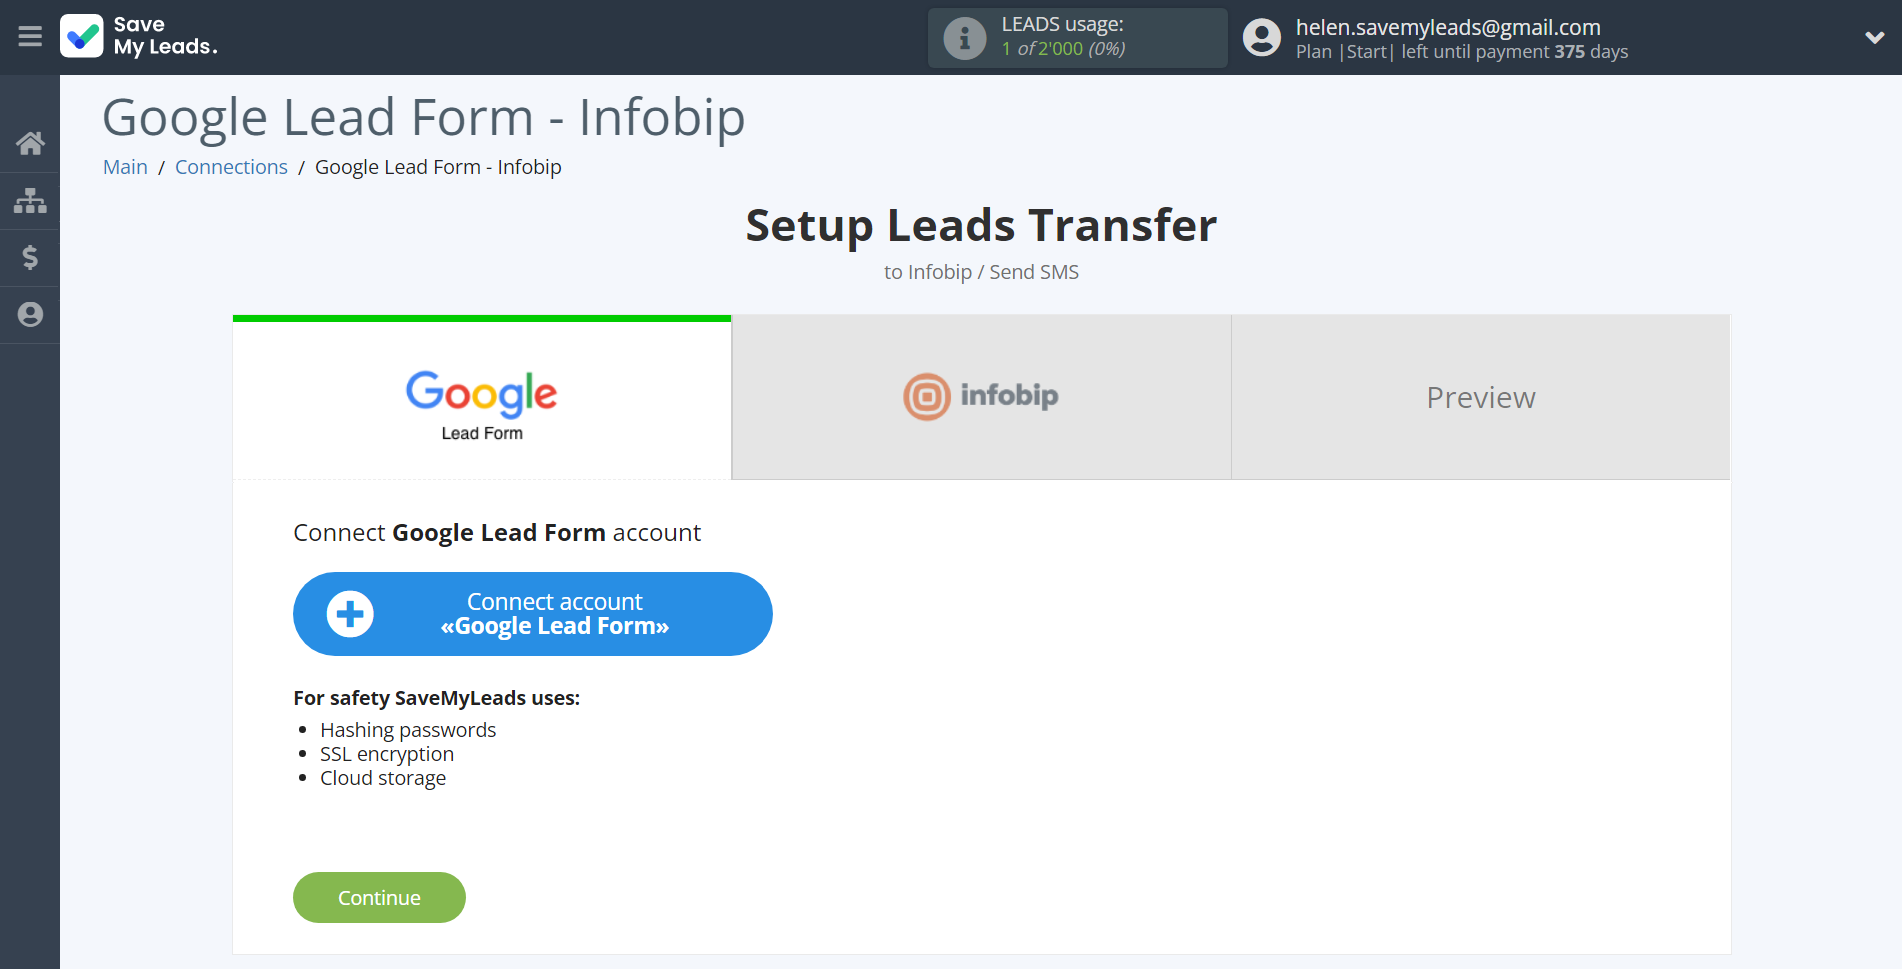 How to Connect Google Lead Form with Infobip | Data Source account